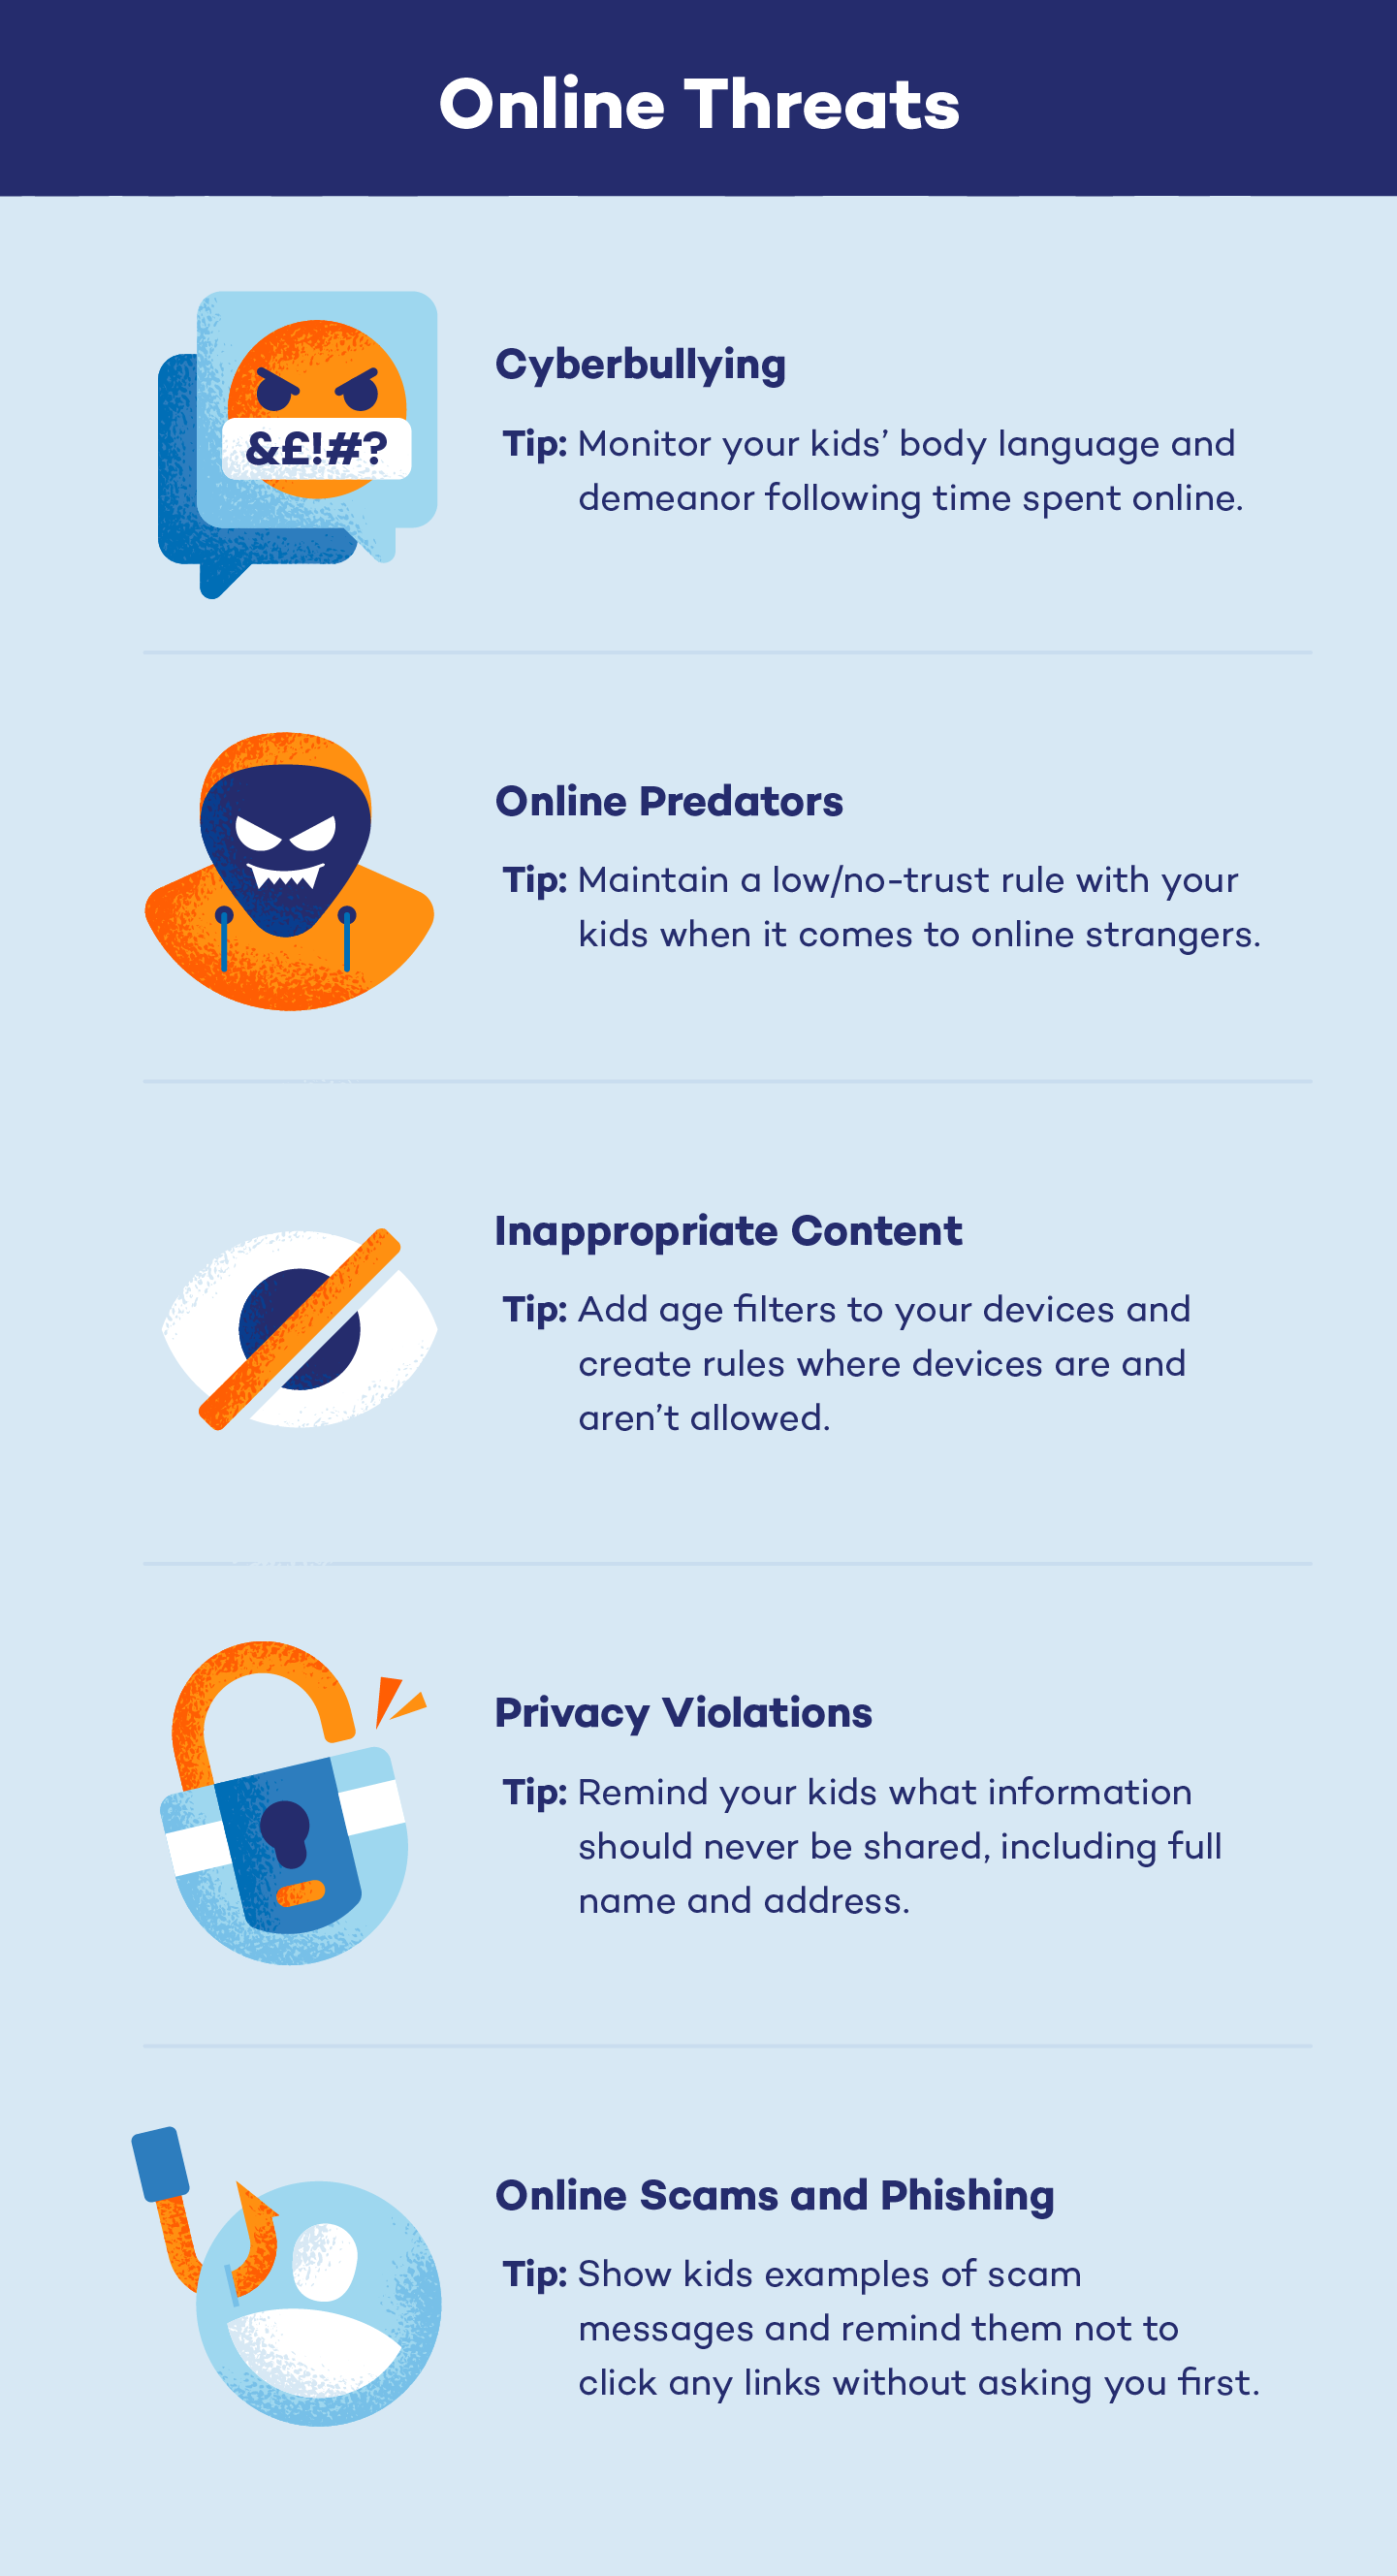 An illustrated list of common online dangers, as well as tips for avoiding them